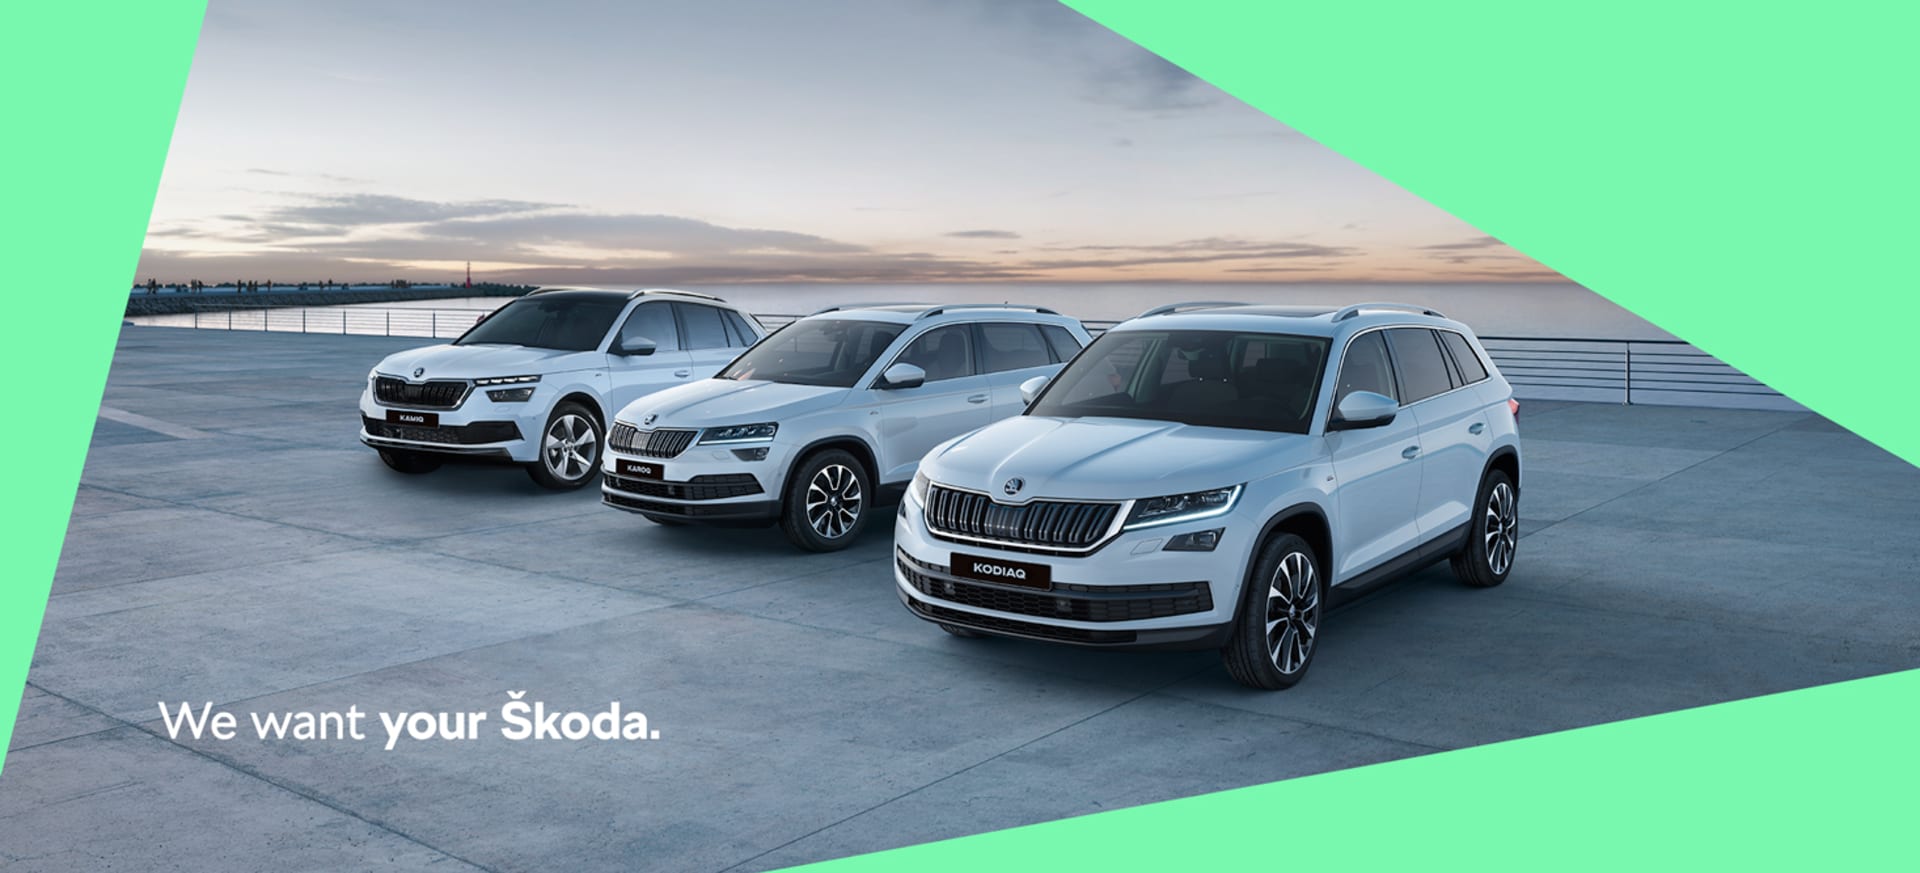 Skoda We Want Your Car Campaign 11x5